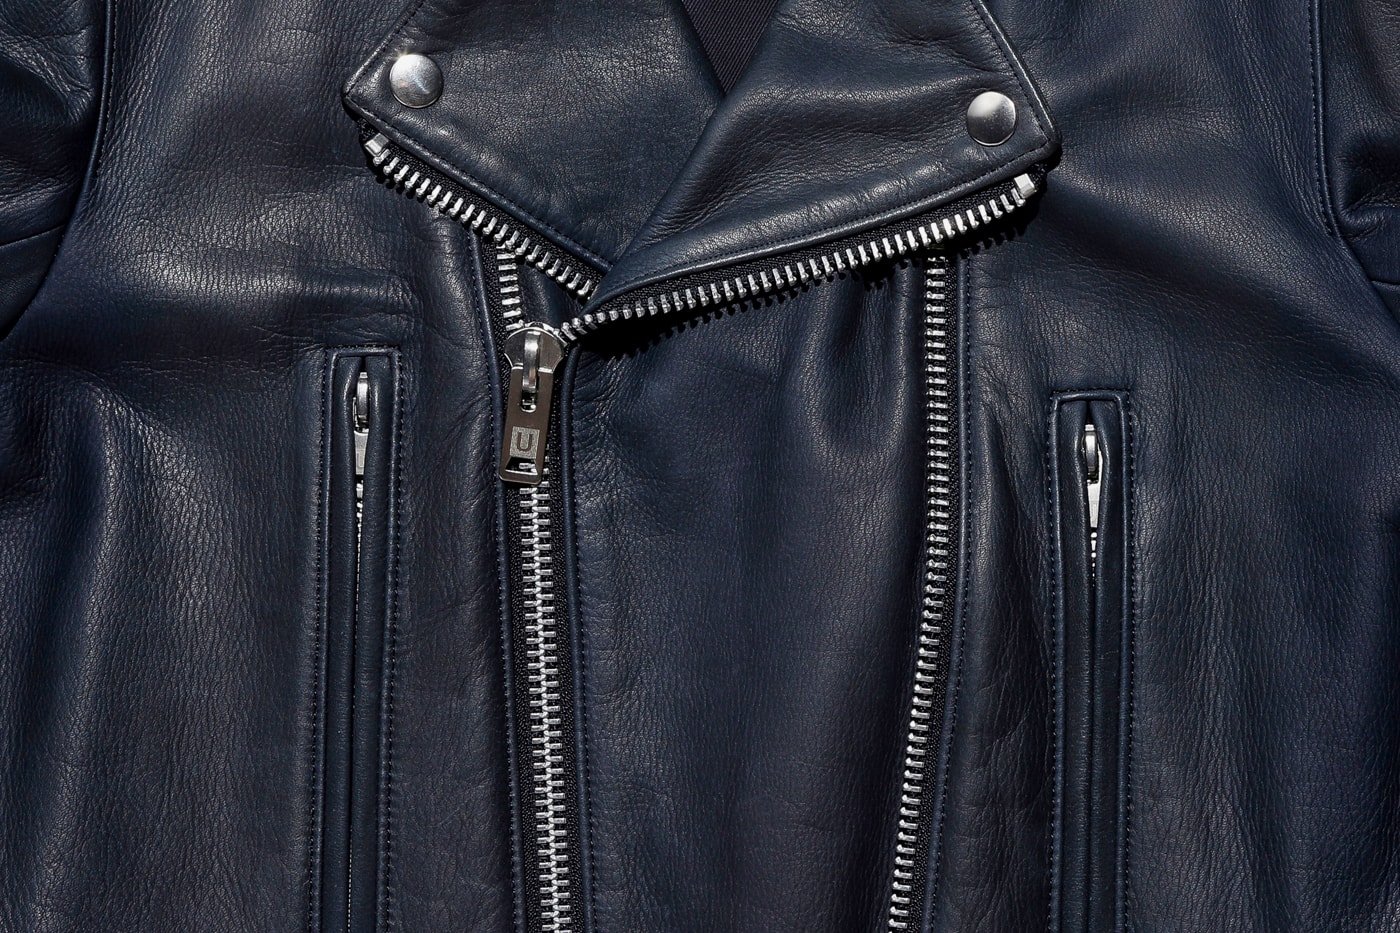 UNDERCOVER Double Zip Biker Jacket black navy leather thick motorcycle punk undercoverism for rebels undercover laboratories jun takahashi